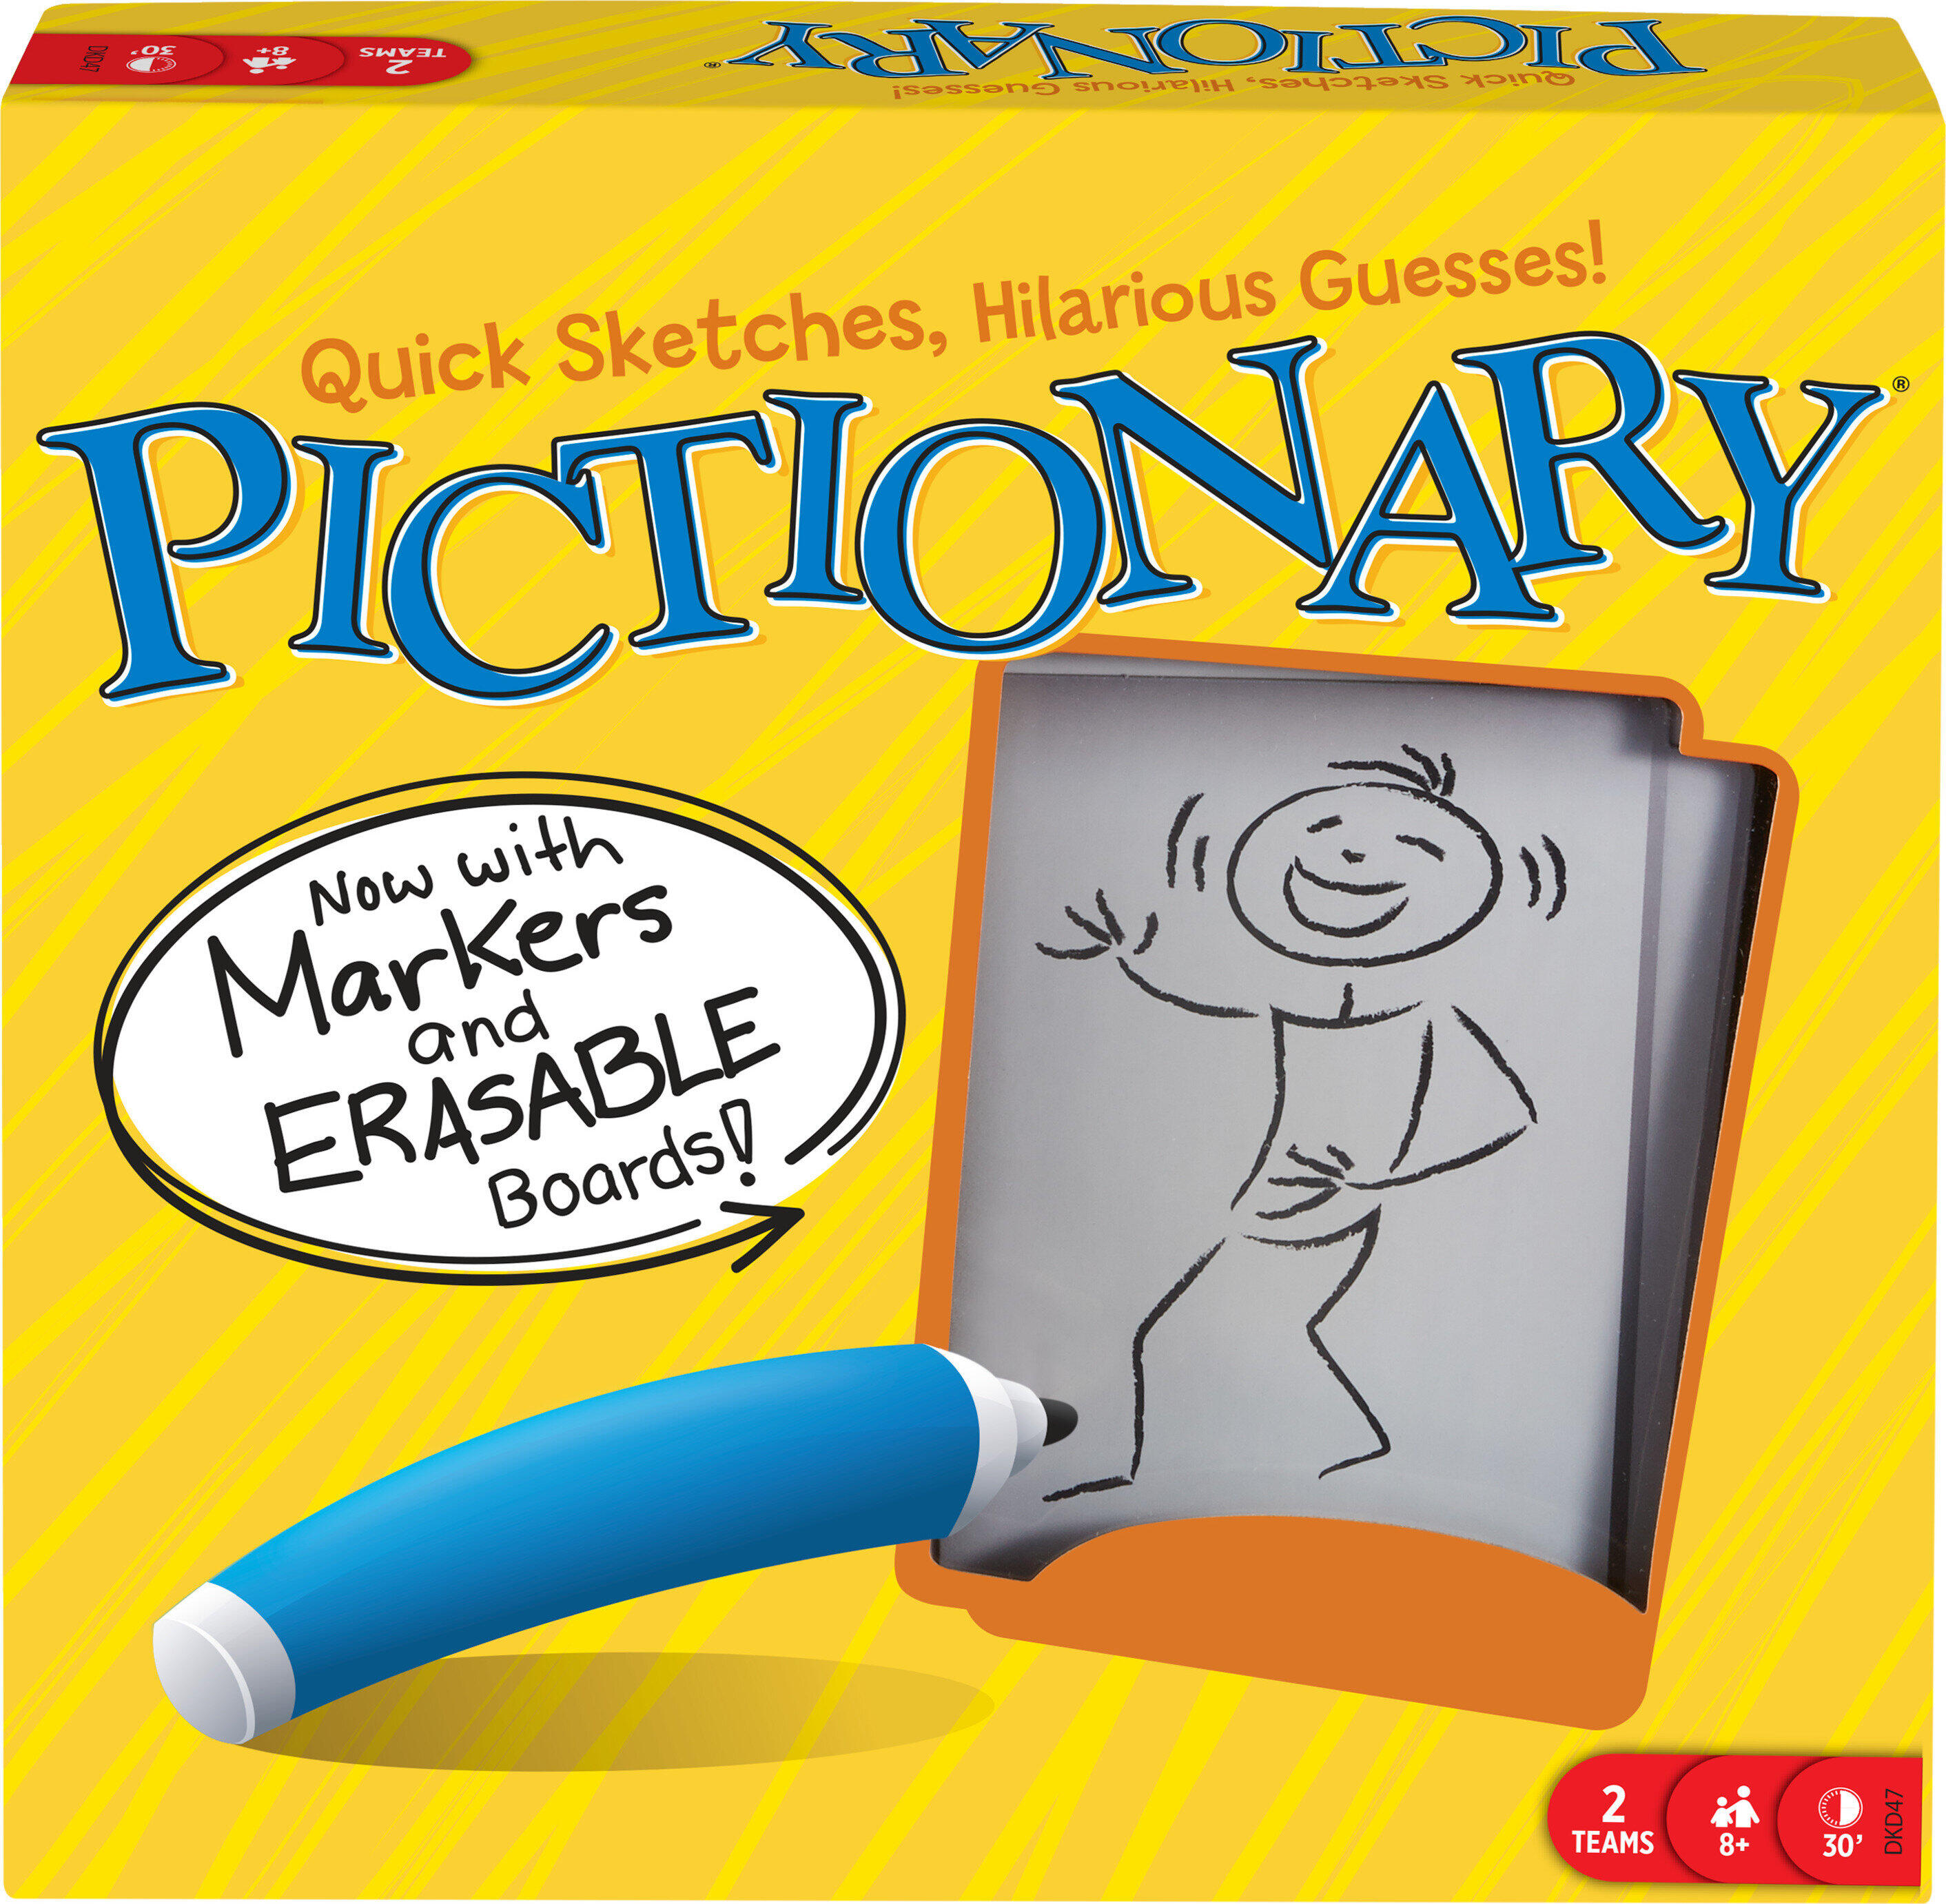 Pictionary Board Game, Drawing Game for Kids, Adults & Game Night with Dry Erase Markers & Boards - image 1 of 8